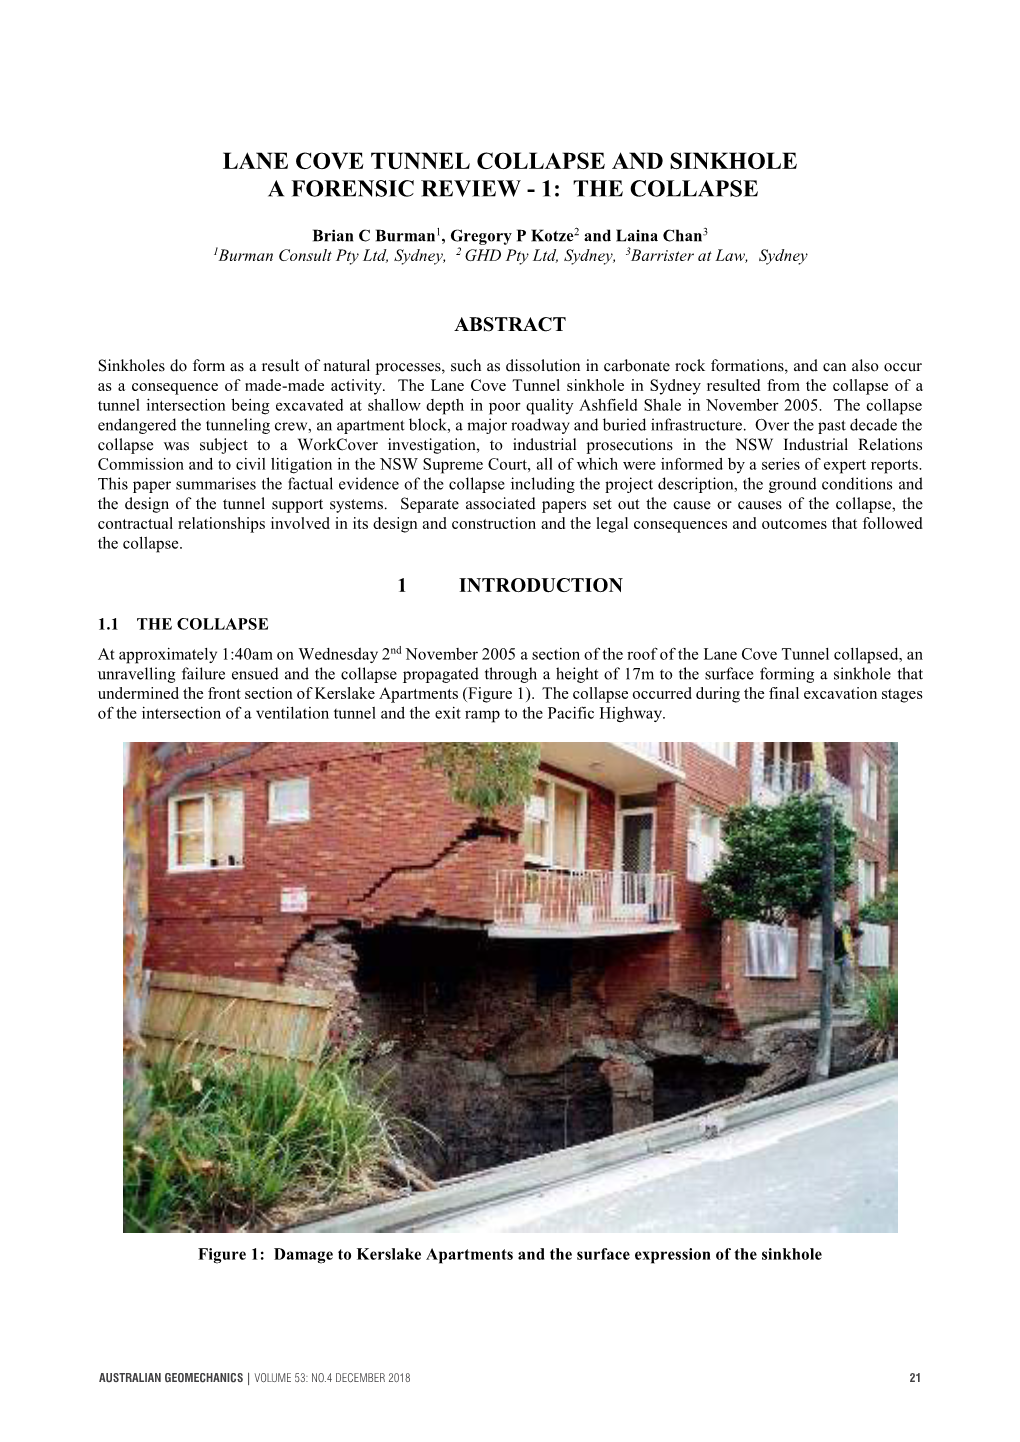 Lane Cove Tunnel Collapse and Sinkhole a Forensic Review - 1: the Collapse